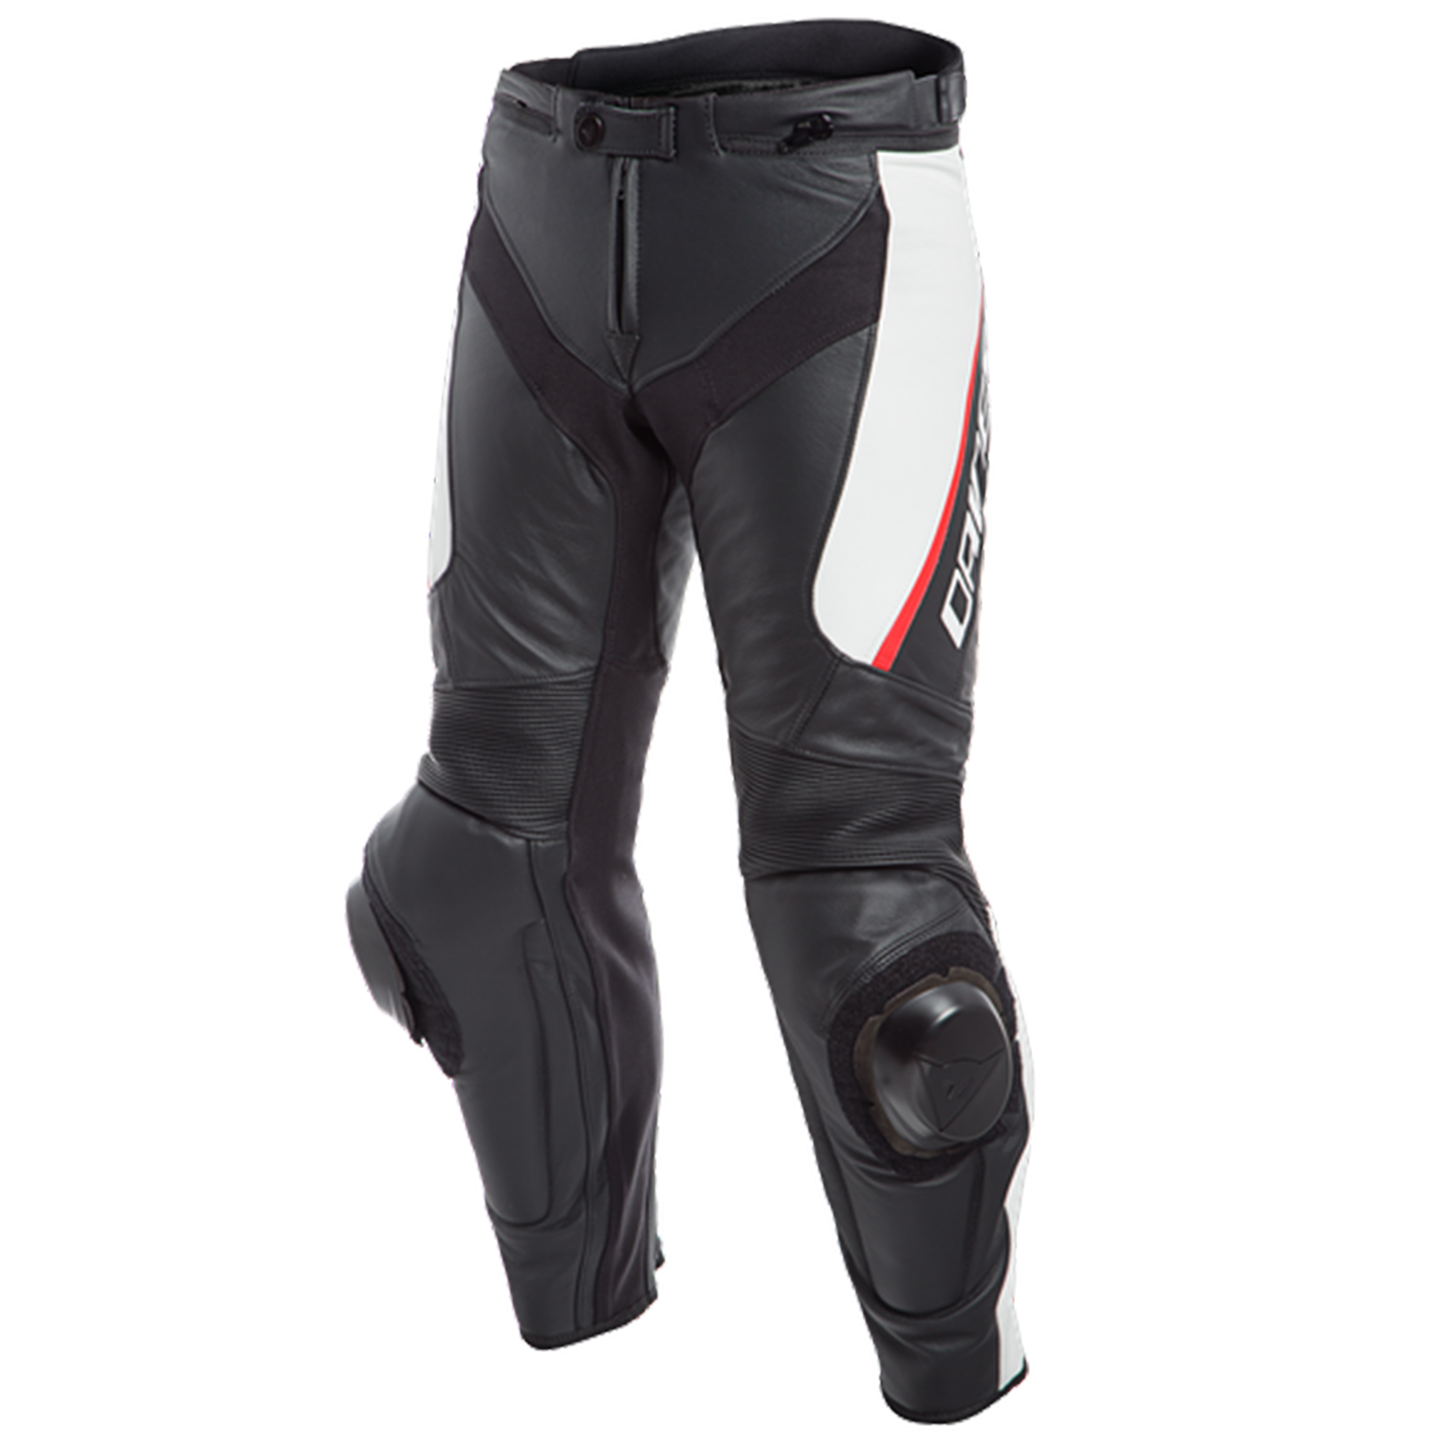 Dainese Delta 3 Leather Pants - Black/White/Red